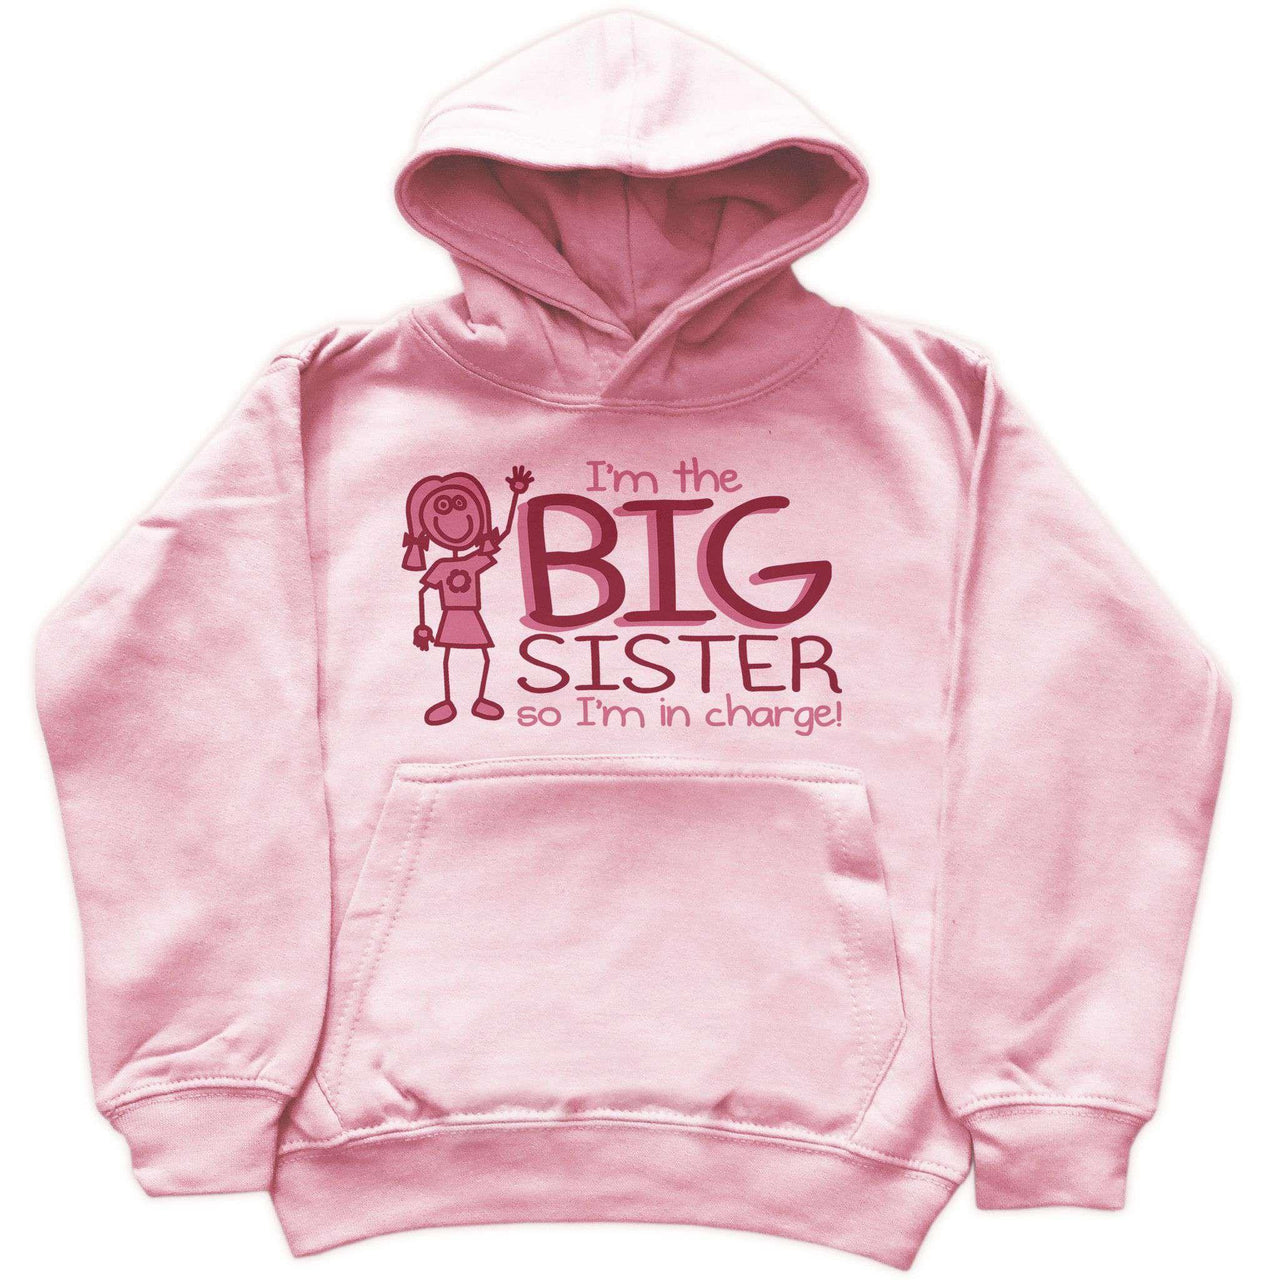 I'm The Big Sister Kids Hoodie For Men and Women 8Ball